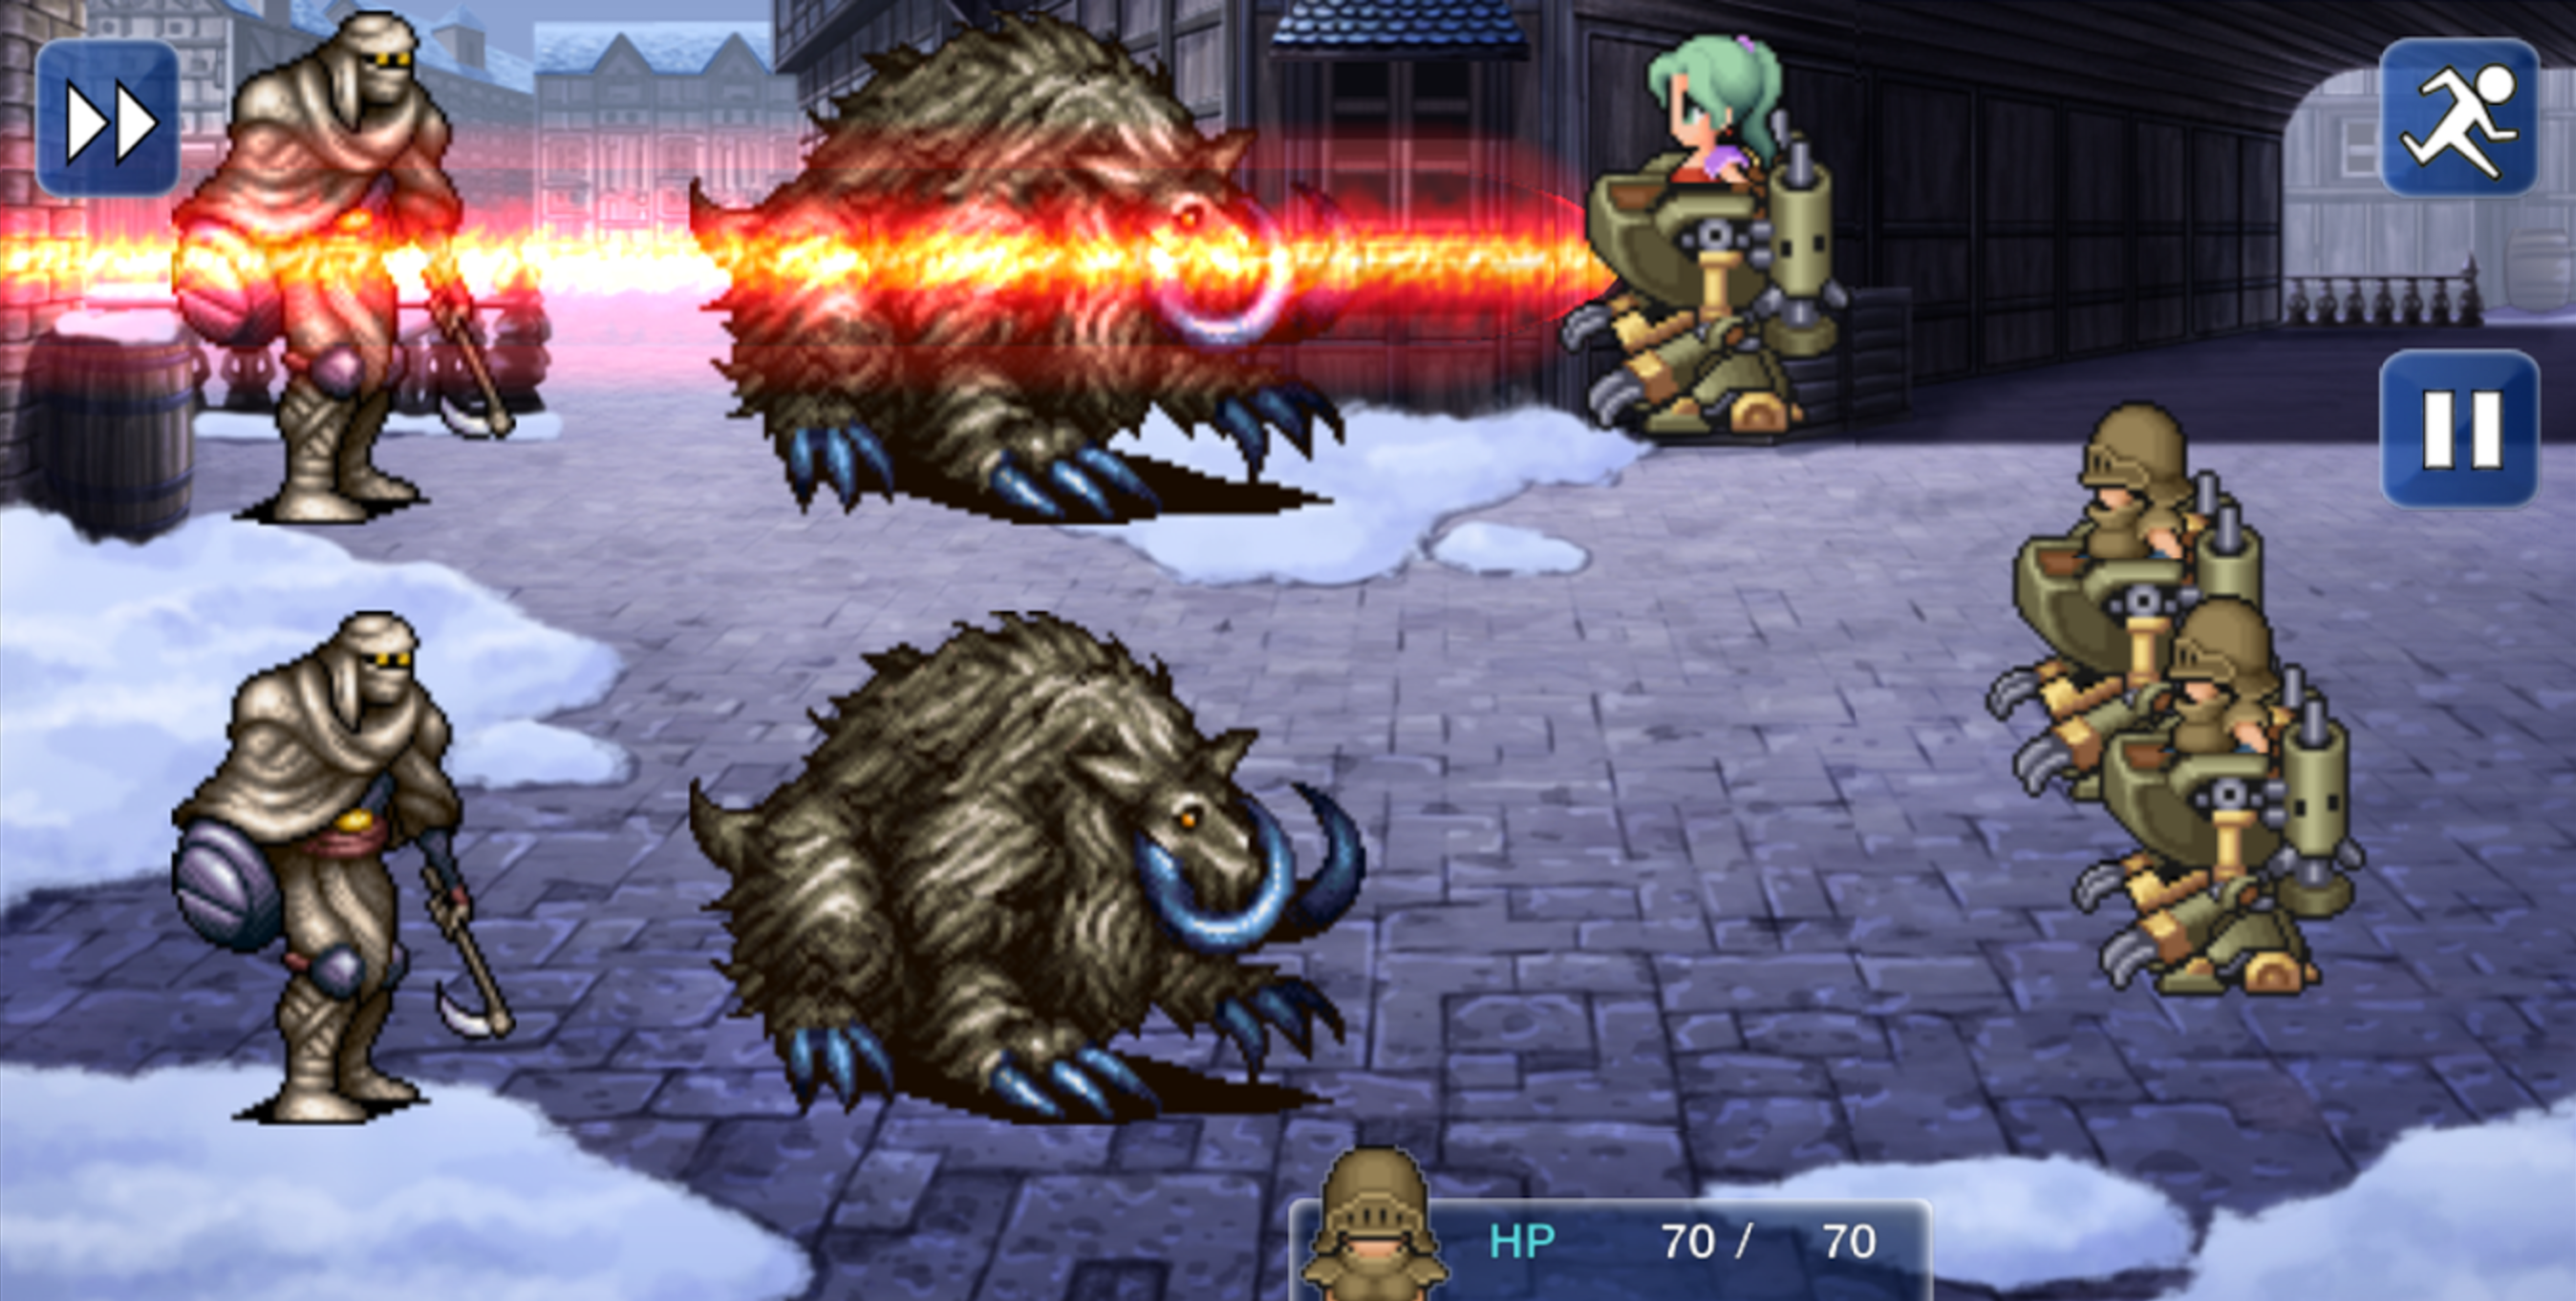 Final Fantasy VI hits its lowest price ever on iOS: $7 (Reg. $15)